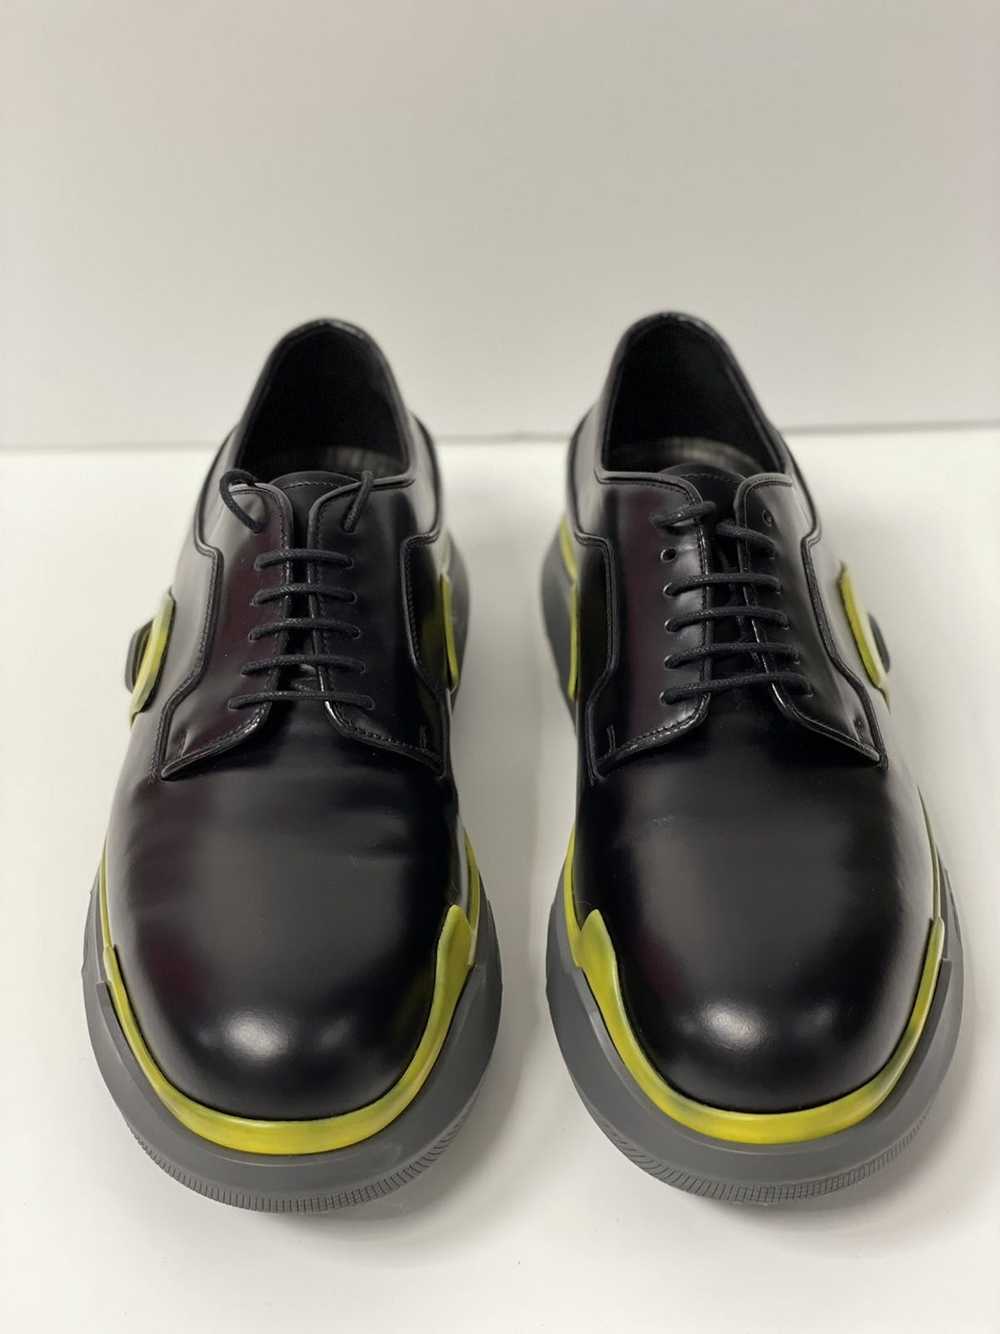 Prada Heavy-Duty Rubber Sole Leather Lace-up Shoes - image 3